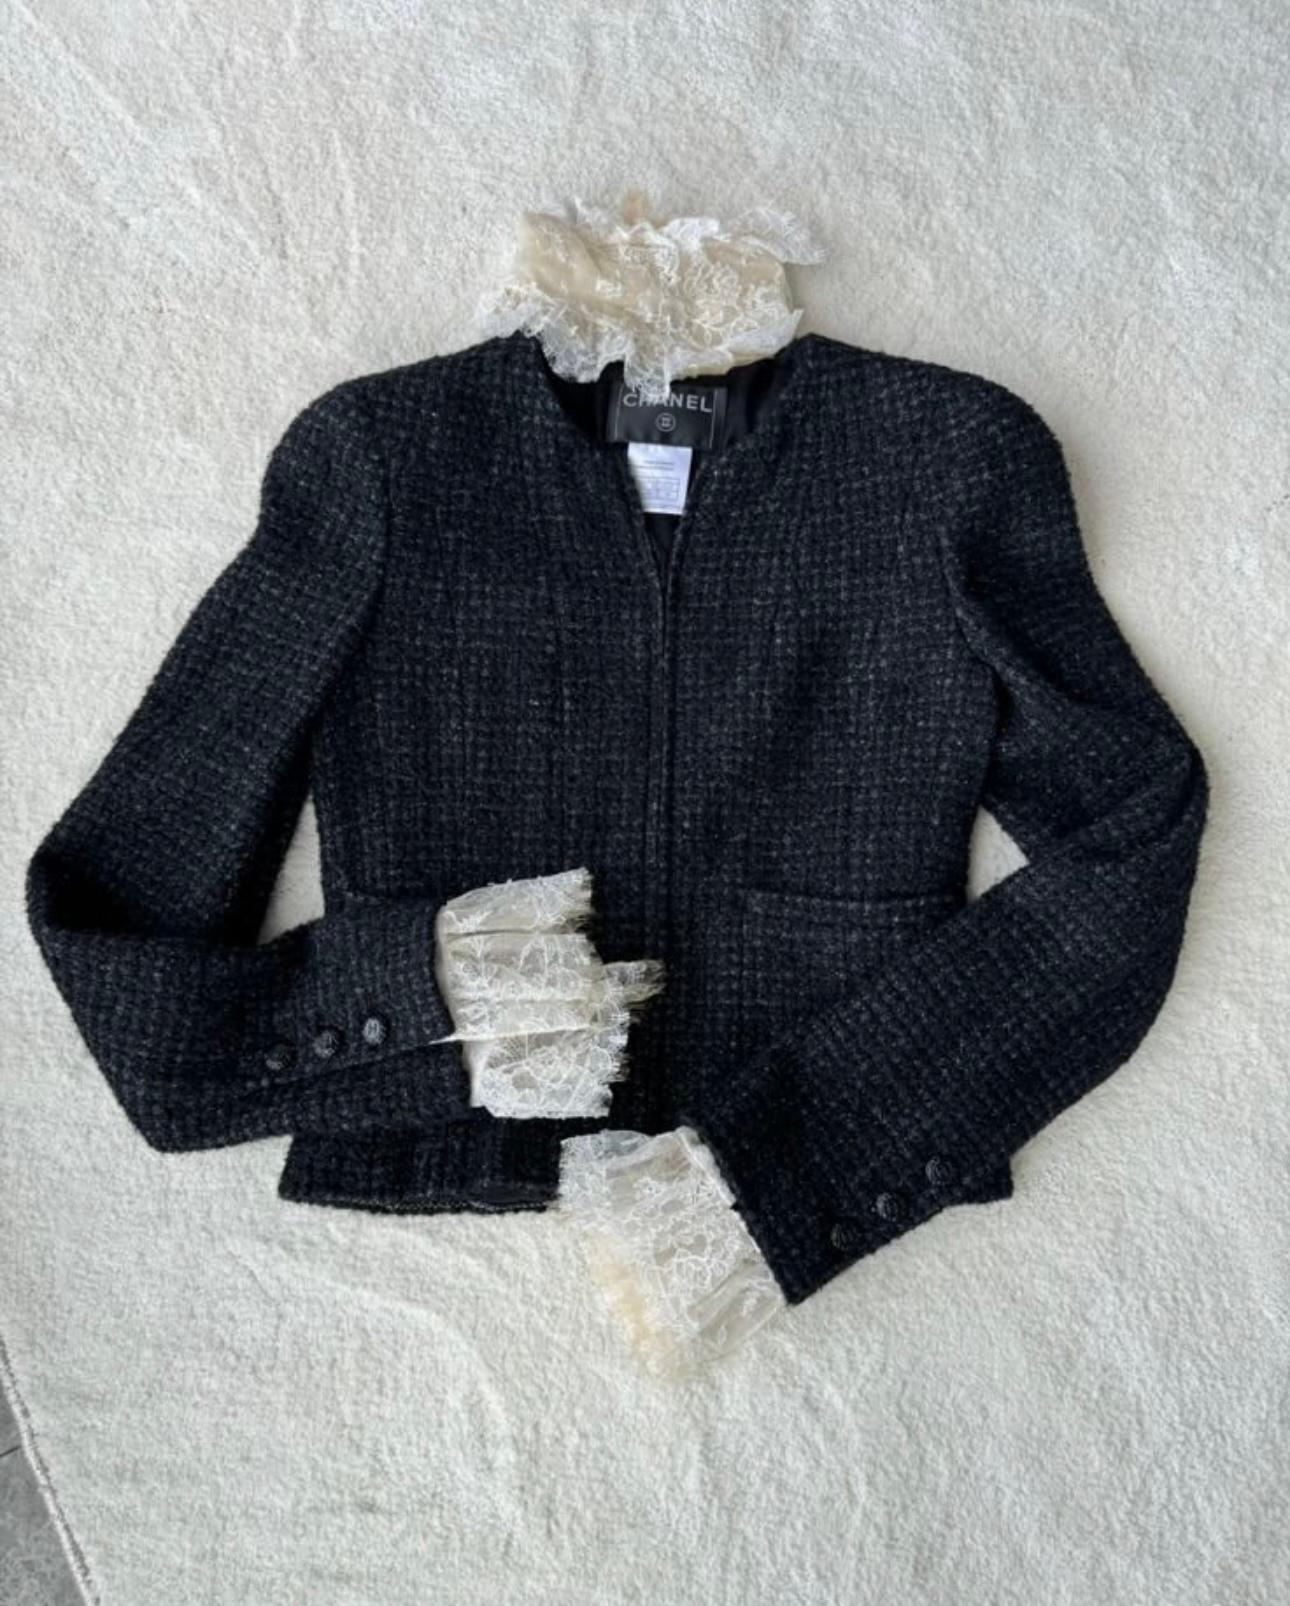 Chanel Ruffle Collar and Cuffs Black Lesage Tweed Jacket In Excellent Condition For Sale In Dubai, AE